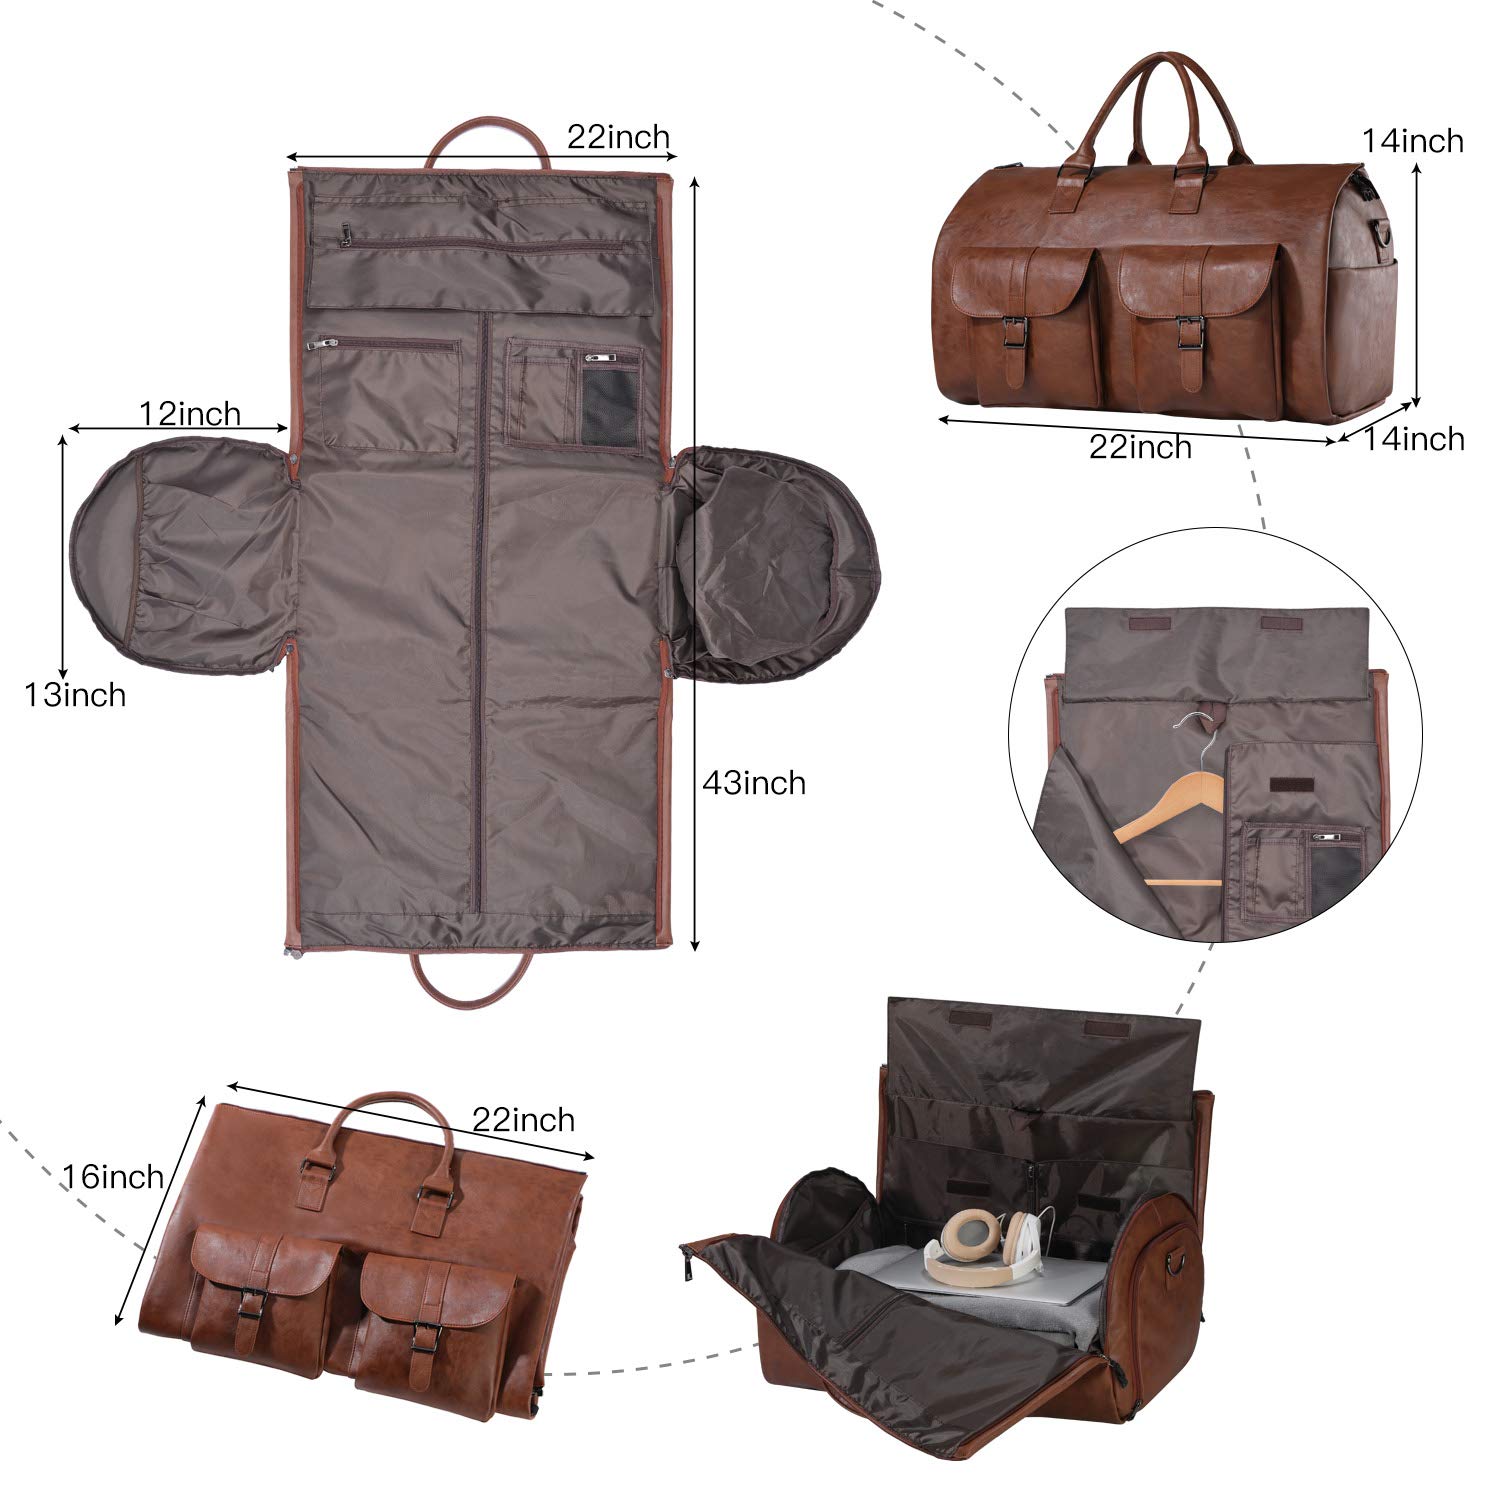 LAST DAY 40% OFF - THE CONVERTIBLE DUFFLE GARMENT LUGGAGE